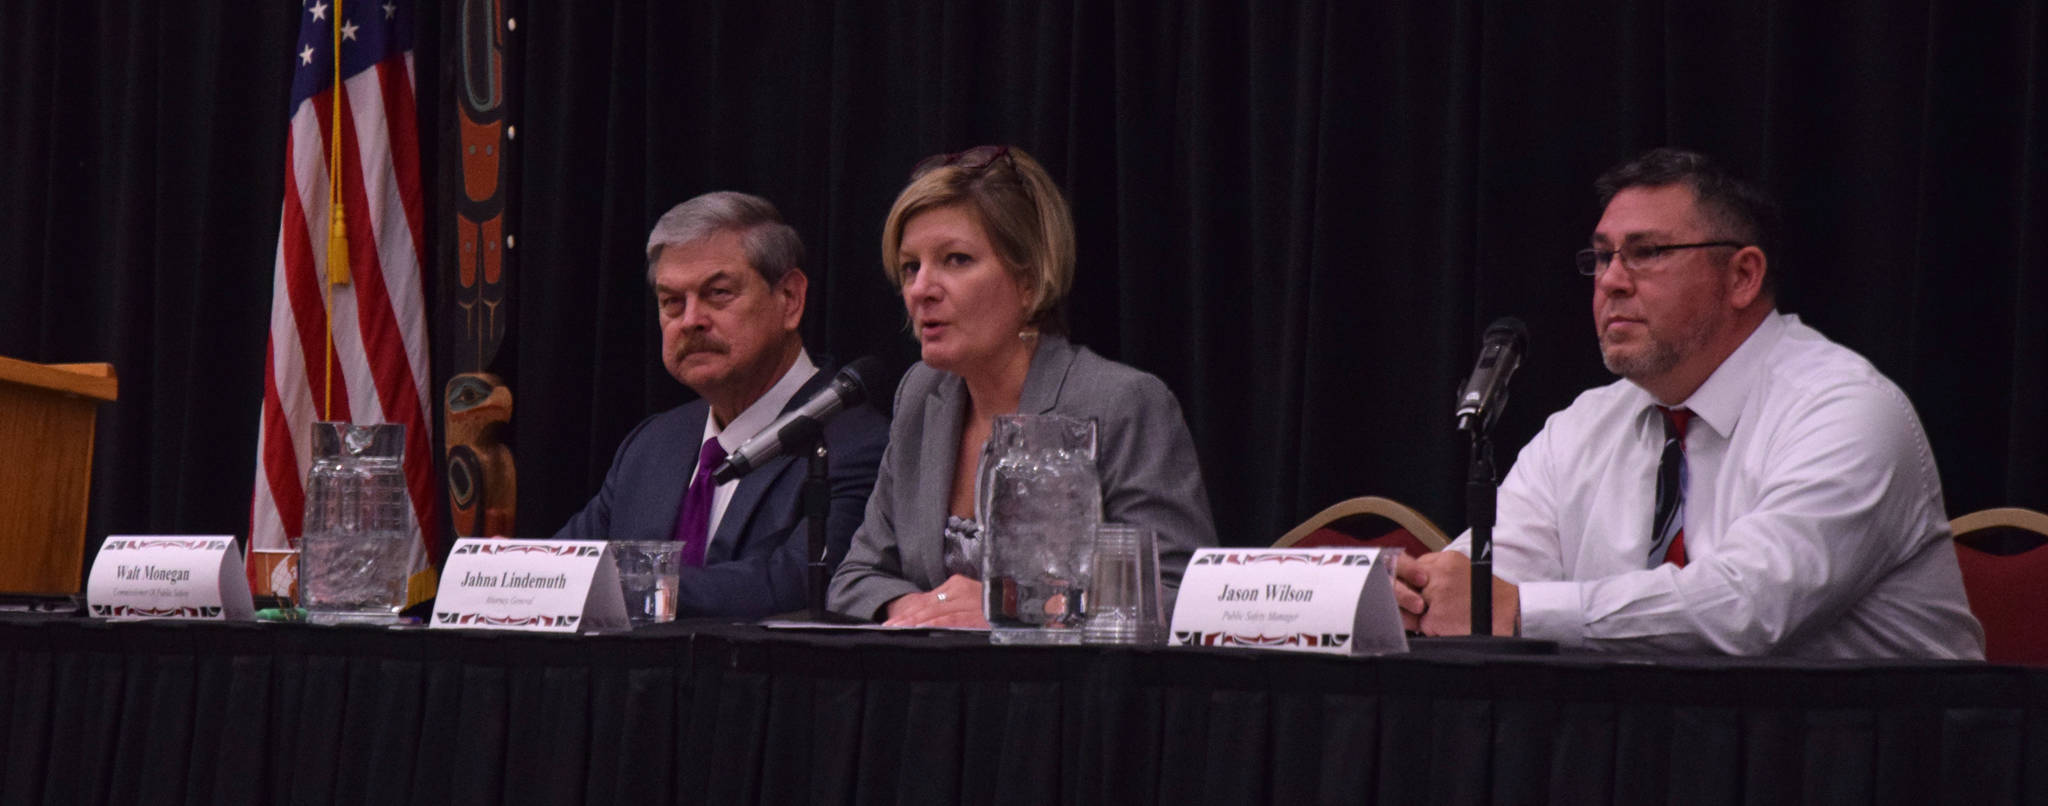 From left to right, Public Safety Commissioner Walt Monegan, Attorney General Jahna Lindemuth, and Central Council Tlingit and Haida Indian Tribes of Alaska Public Safety Manager Jason Wilson participate in a Native Issues Forum lunchtime discussion on Thursday, Jan. 18, 2018 in the Elizabeth Peratrovich Hall. (James Brooks | Juneau Empire)